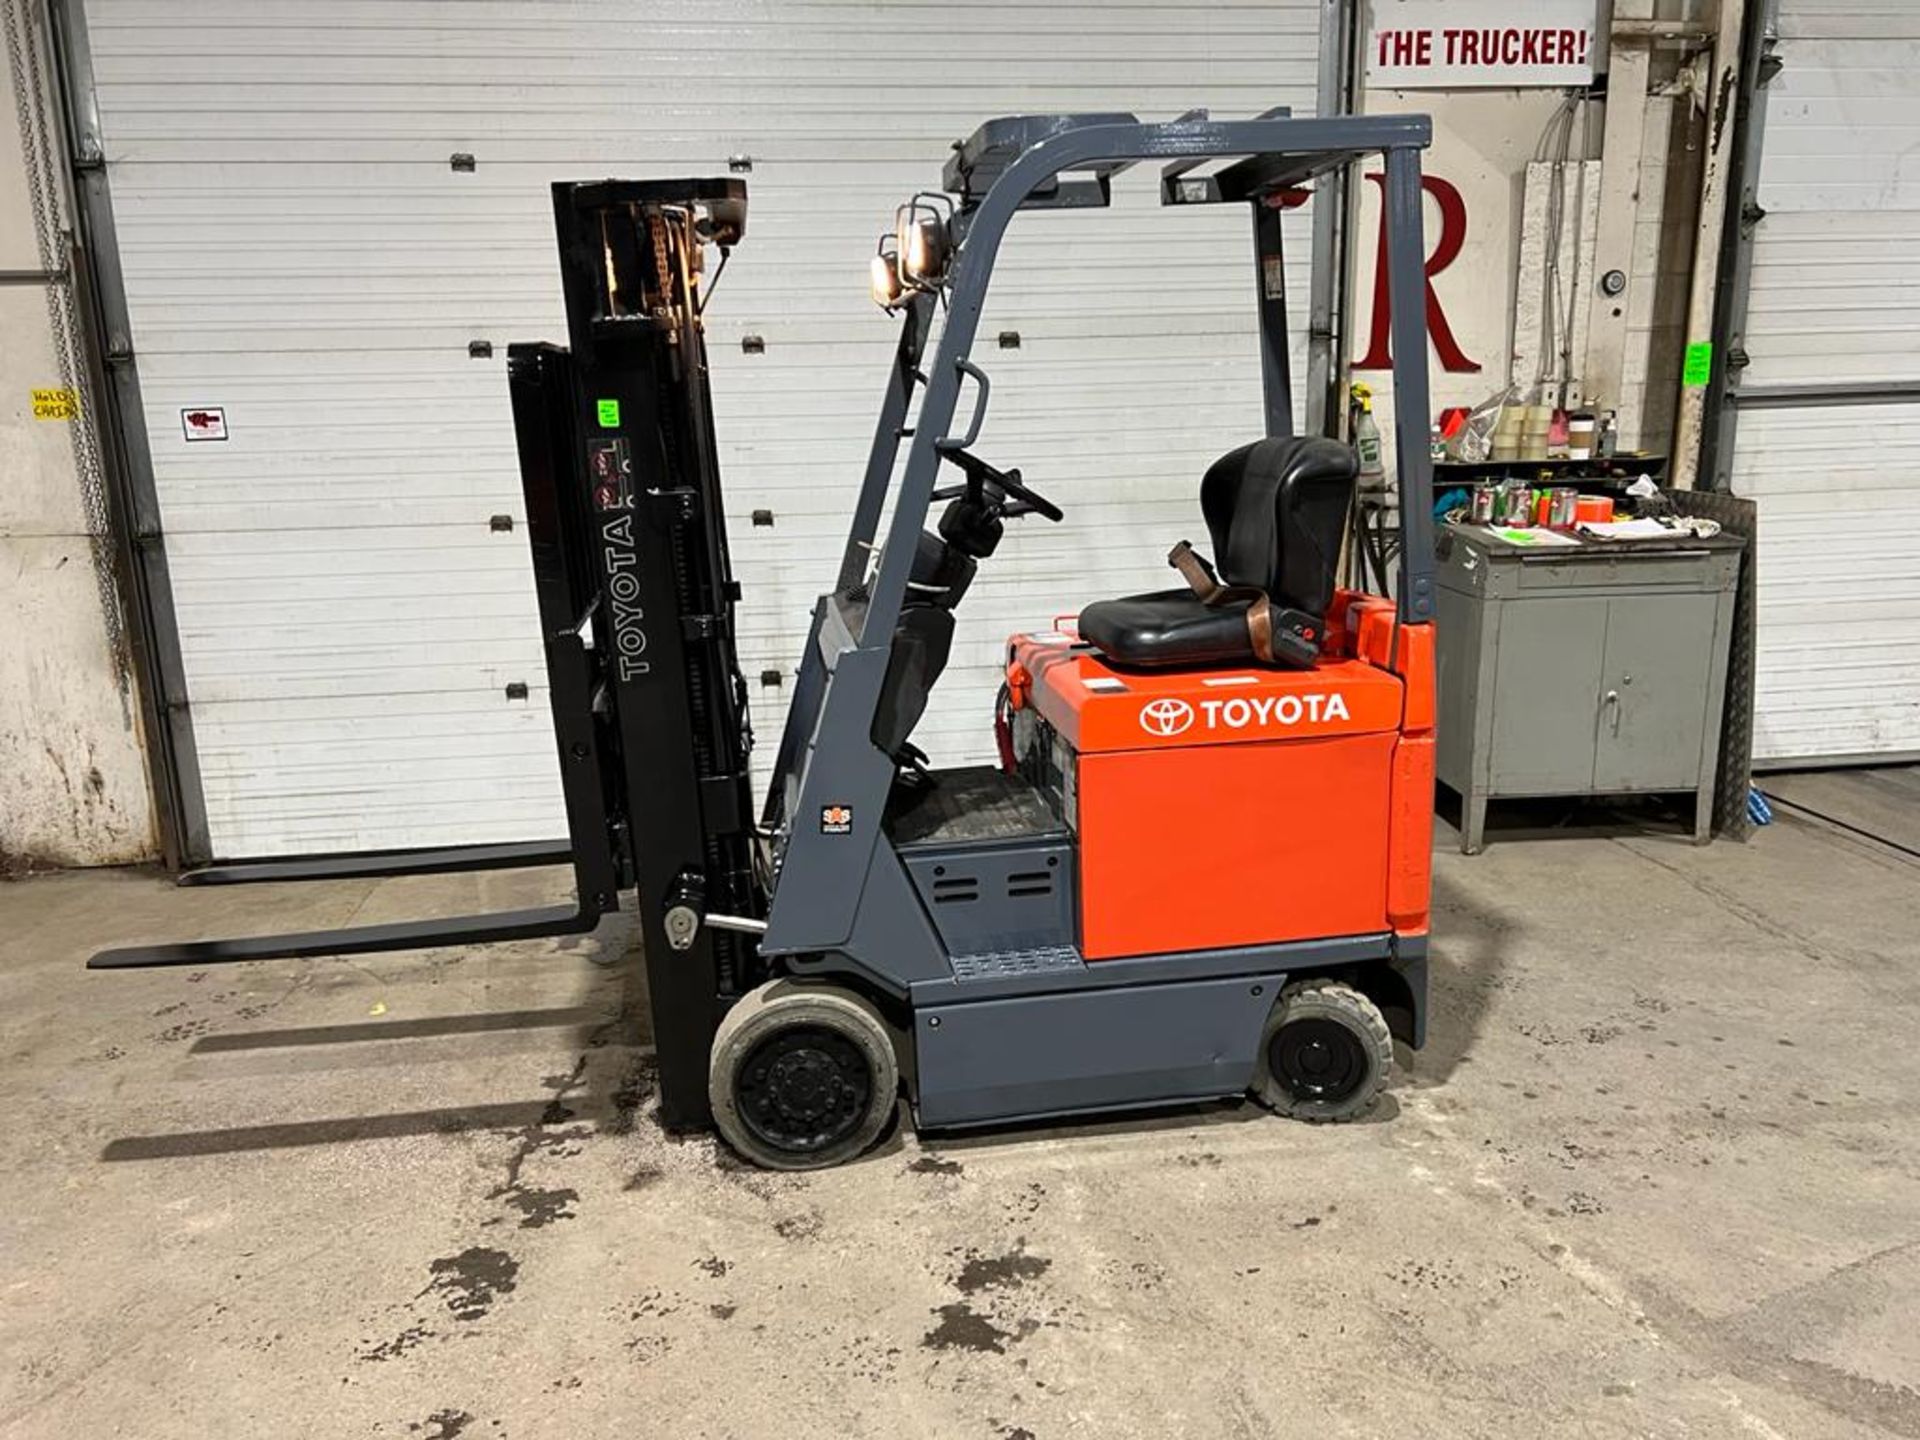 NICE 2016 Toyota 3,000lbs Capacity Forklift NEW 36V Battery with 3-stage mast - FREE CUSTOMS